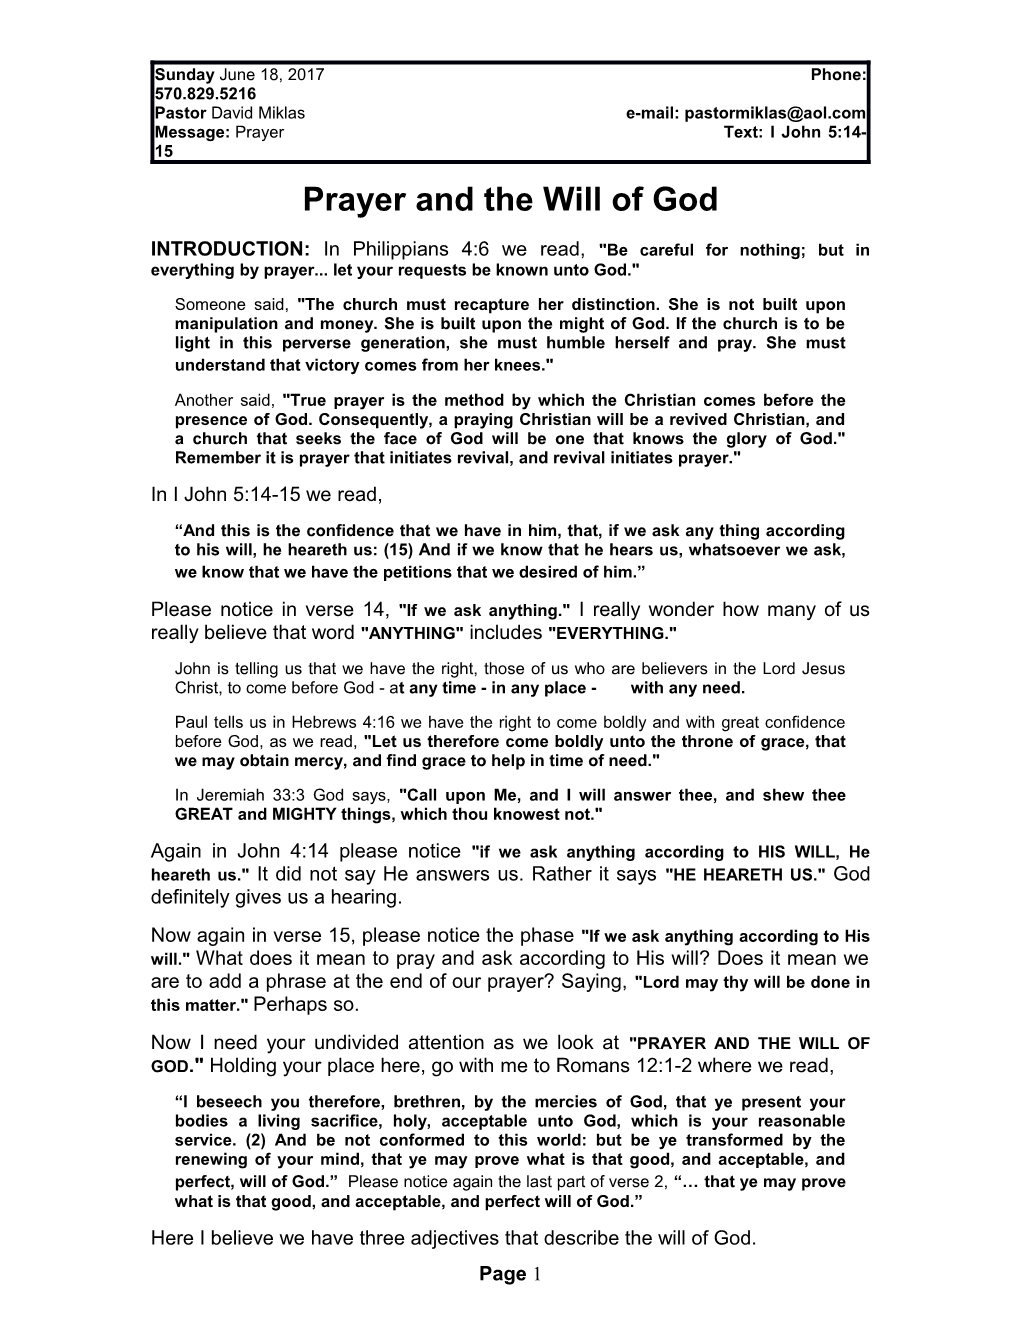 Prayer and the Will of God